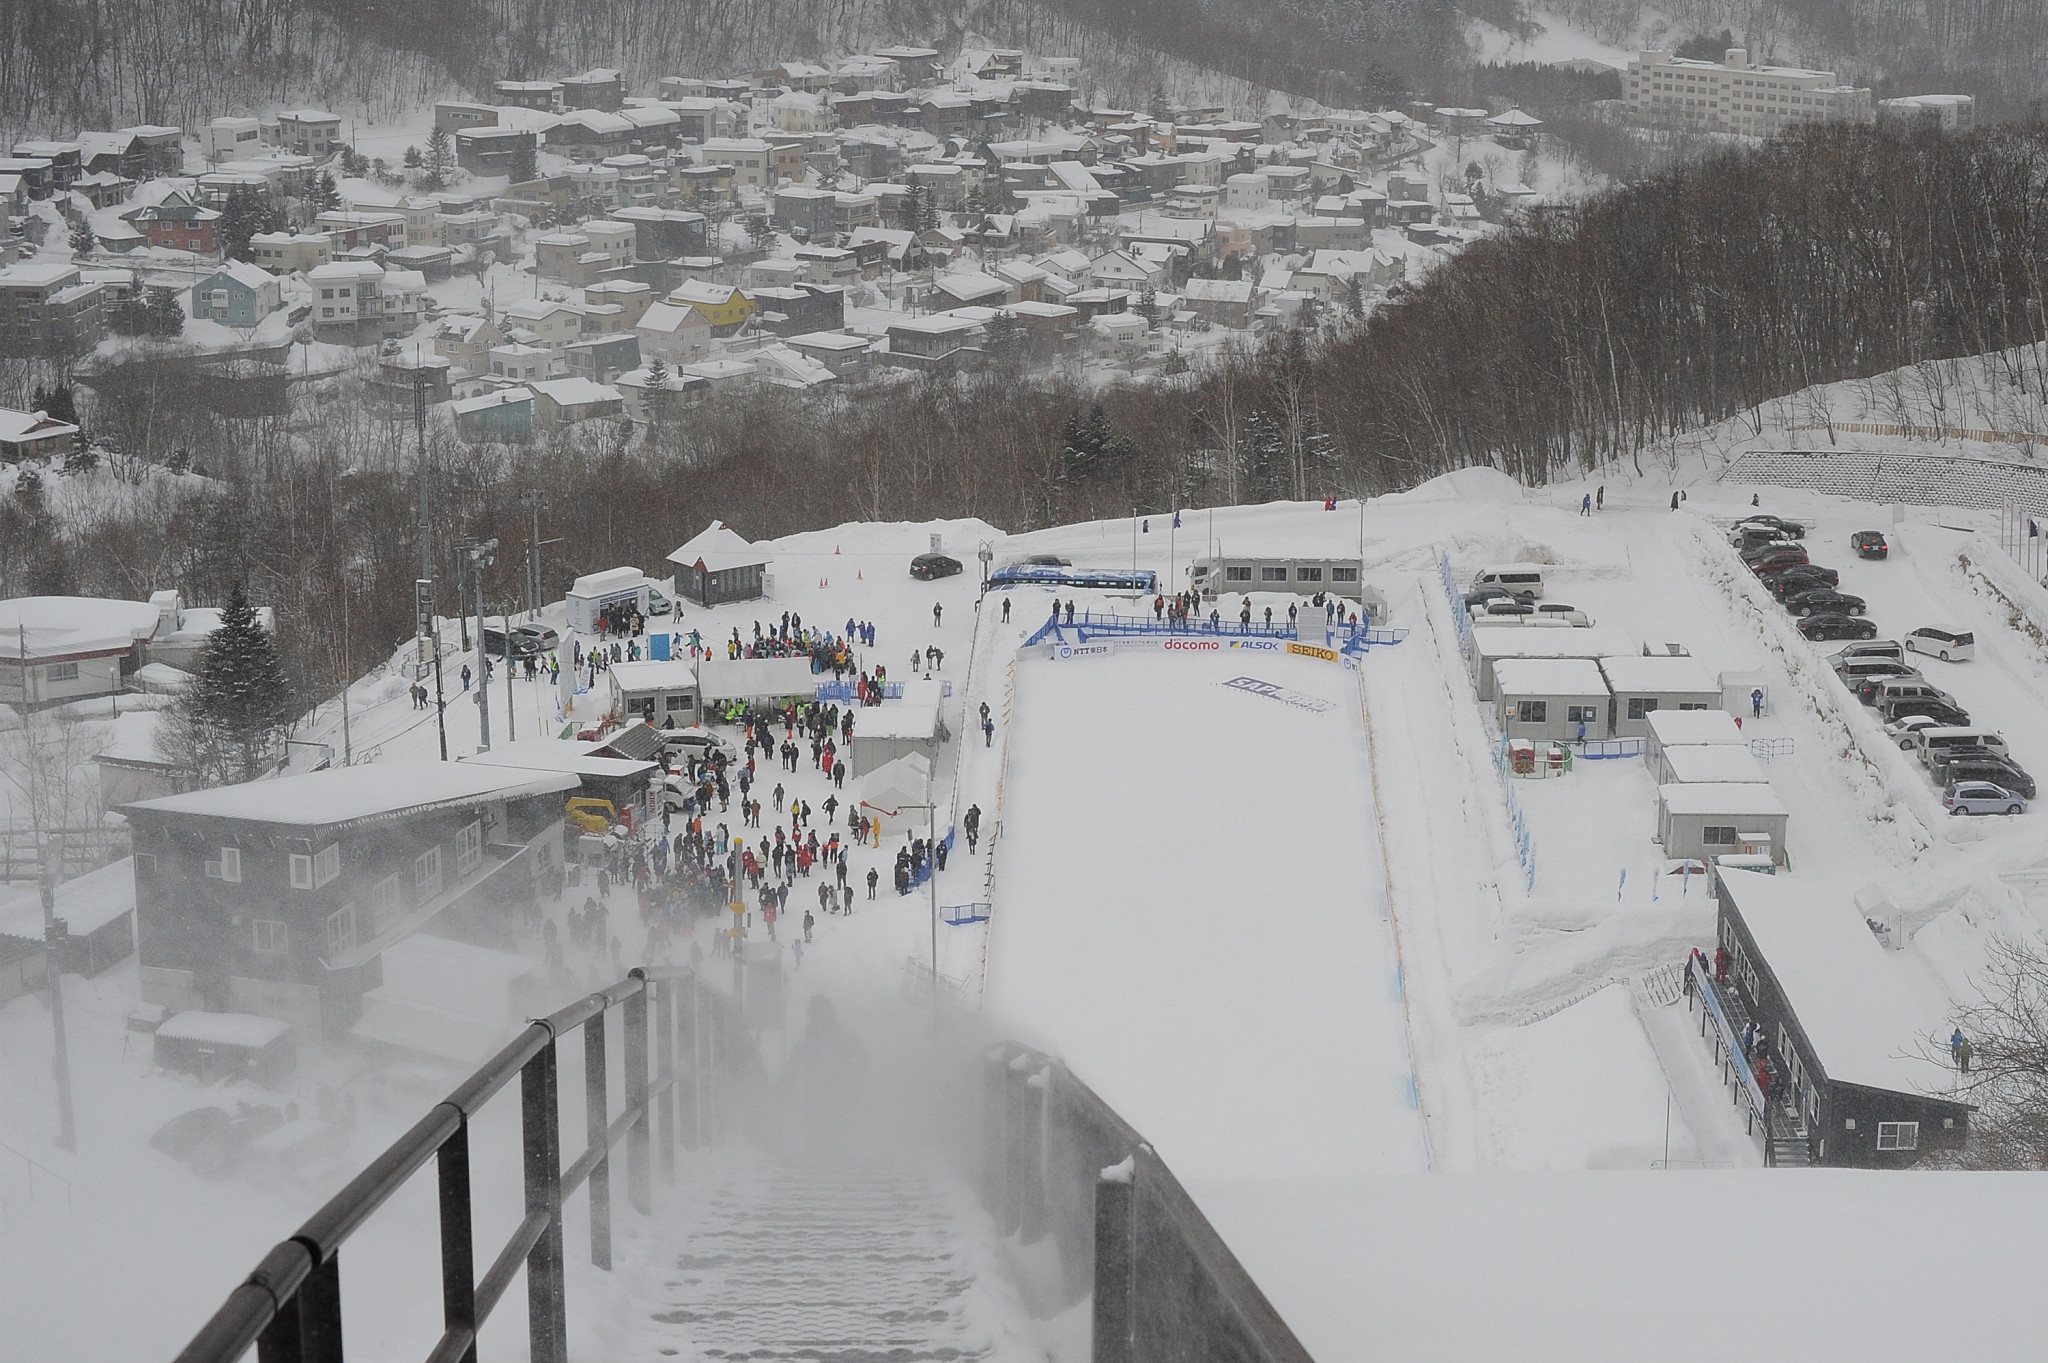 Sapporo set to withdraw bid for 2026 Winter Olympic and Paralympic Games